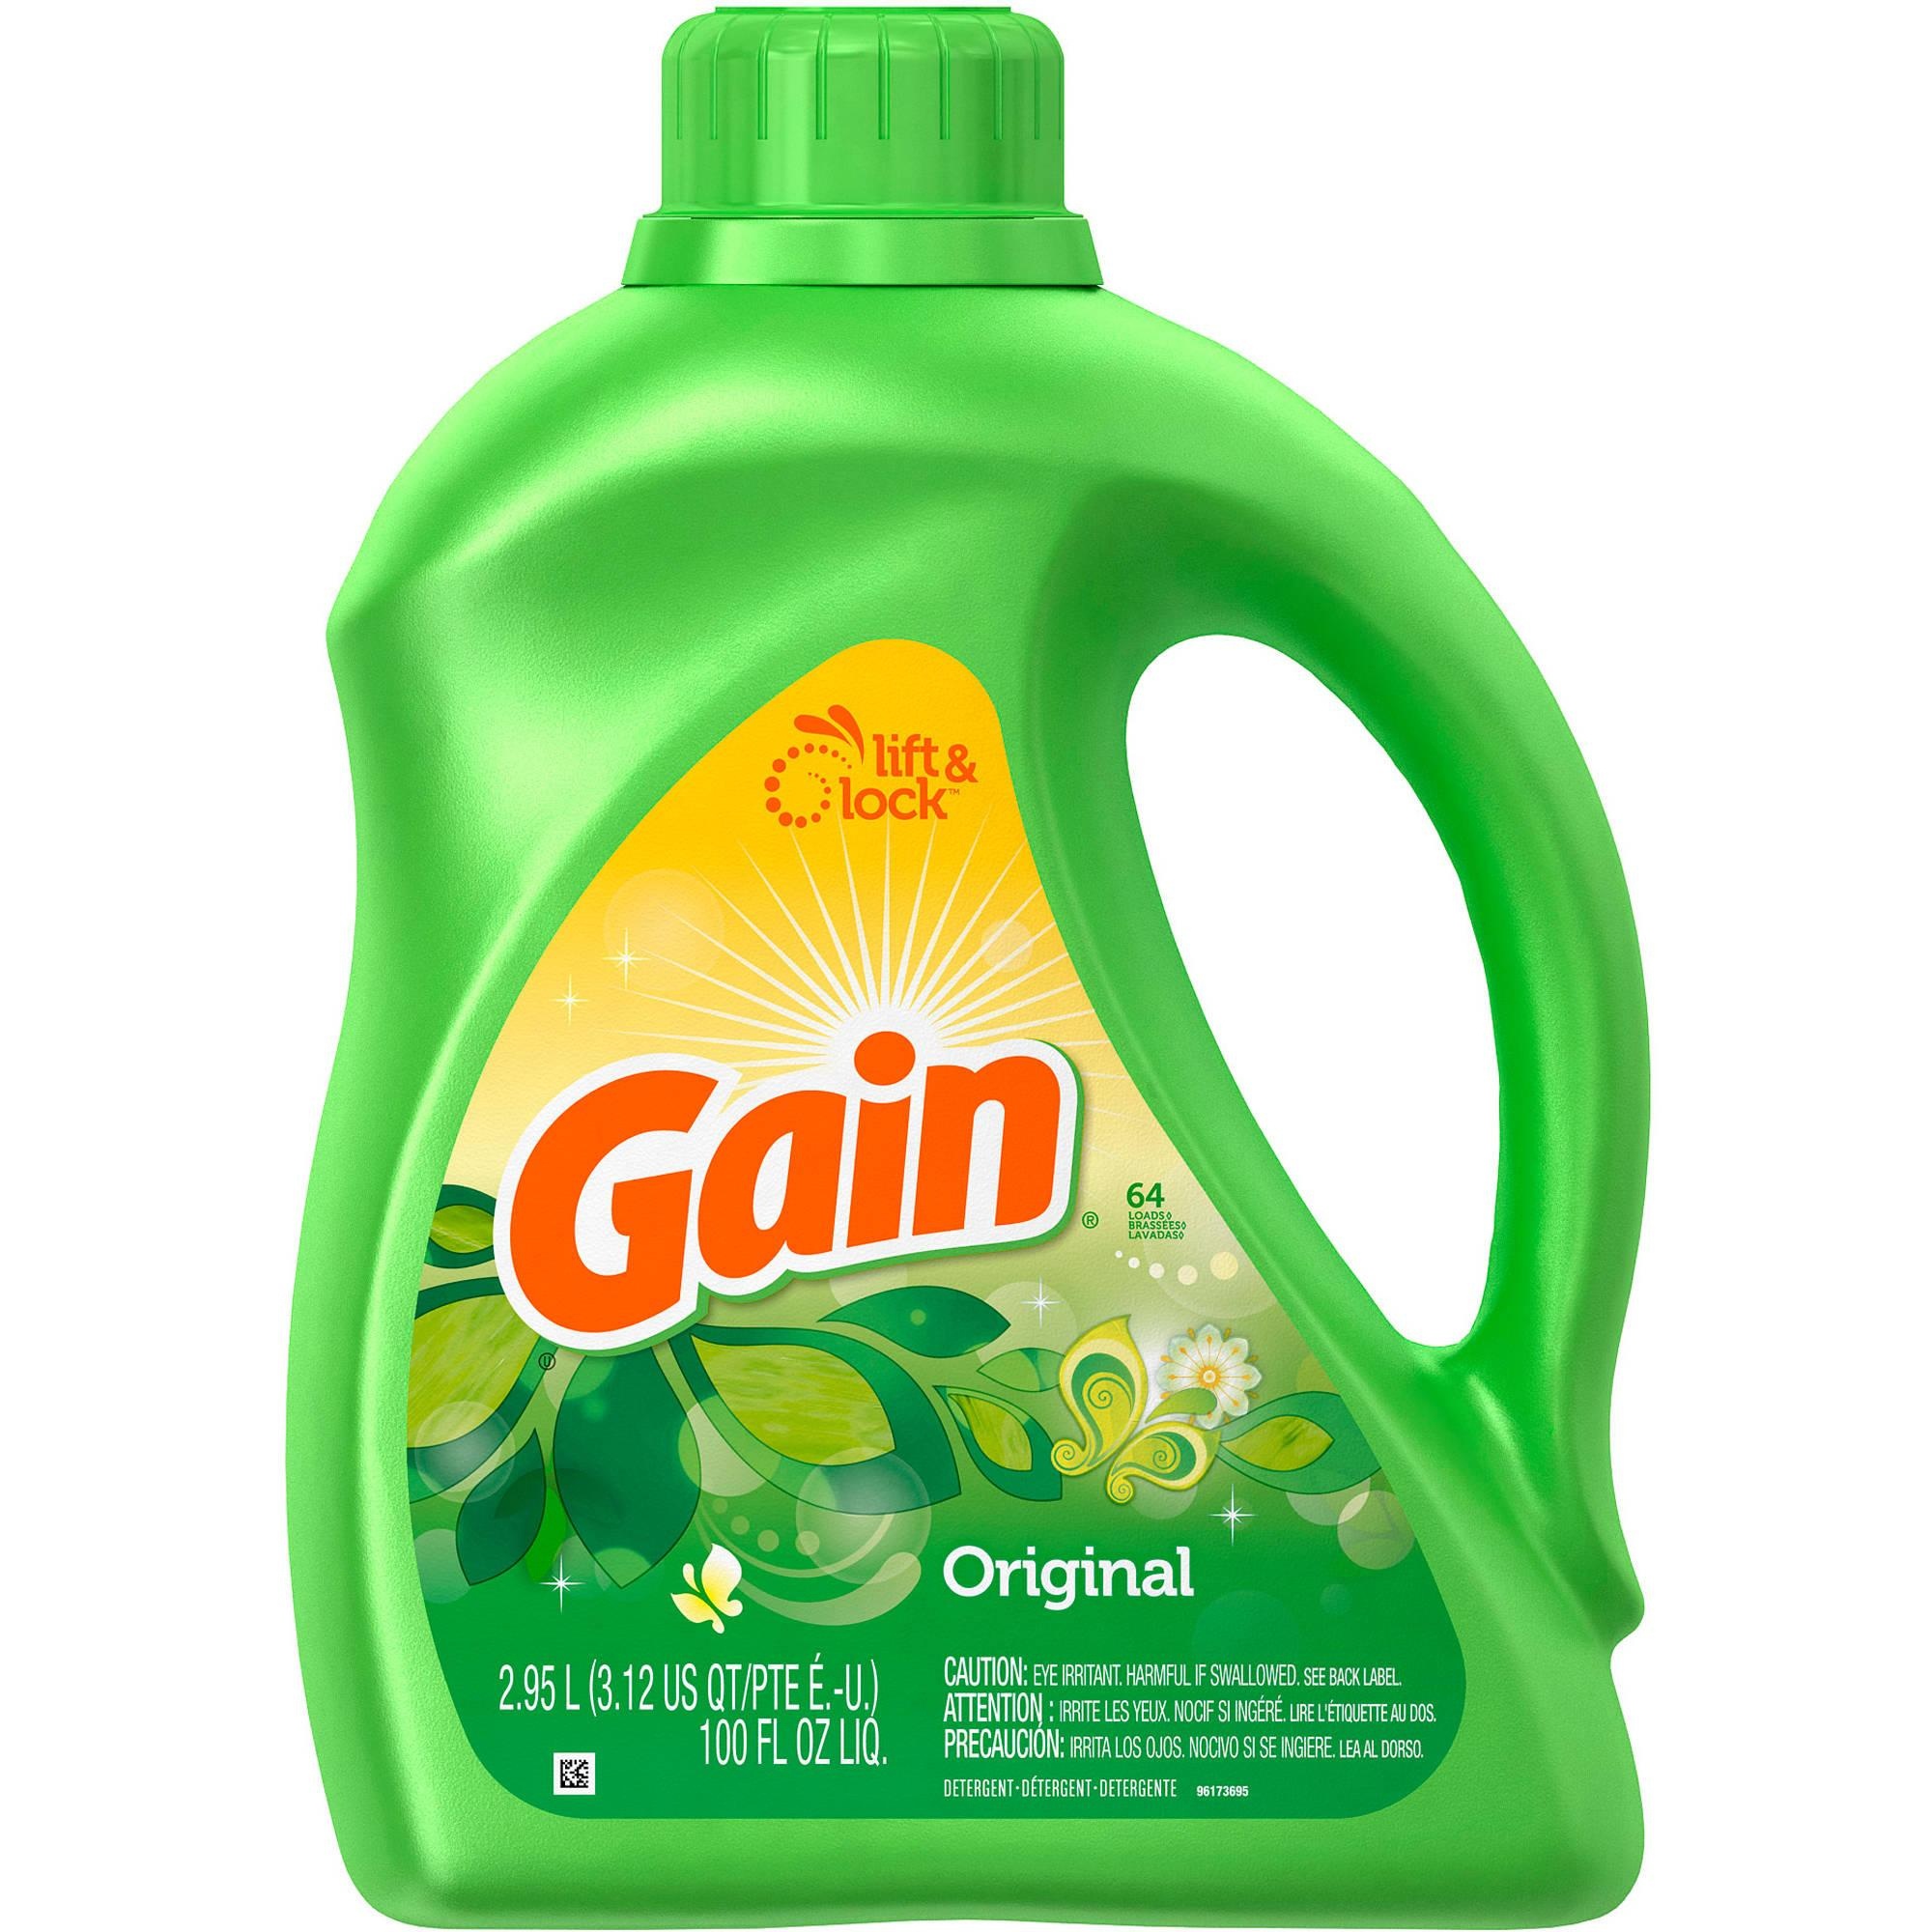 Laundry Detergent At Lowes Free Printable Gain Laundry Detergent 